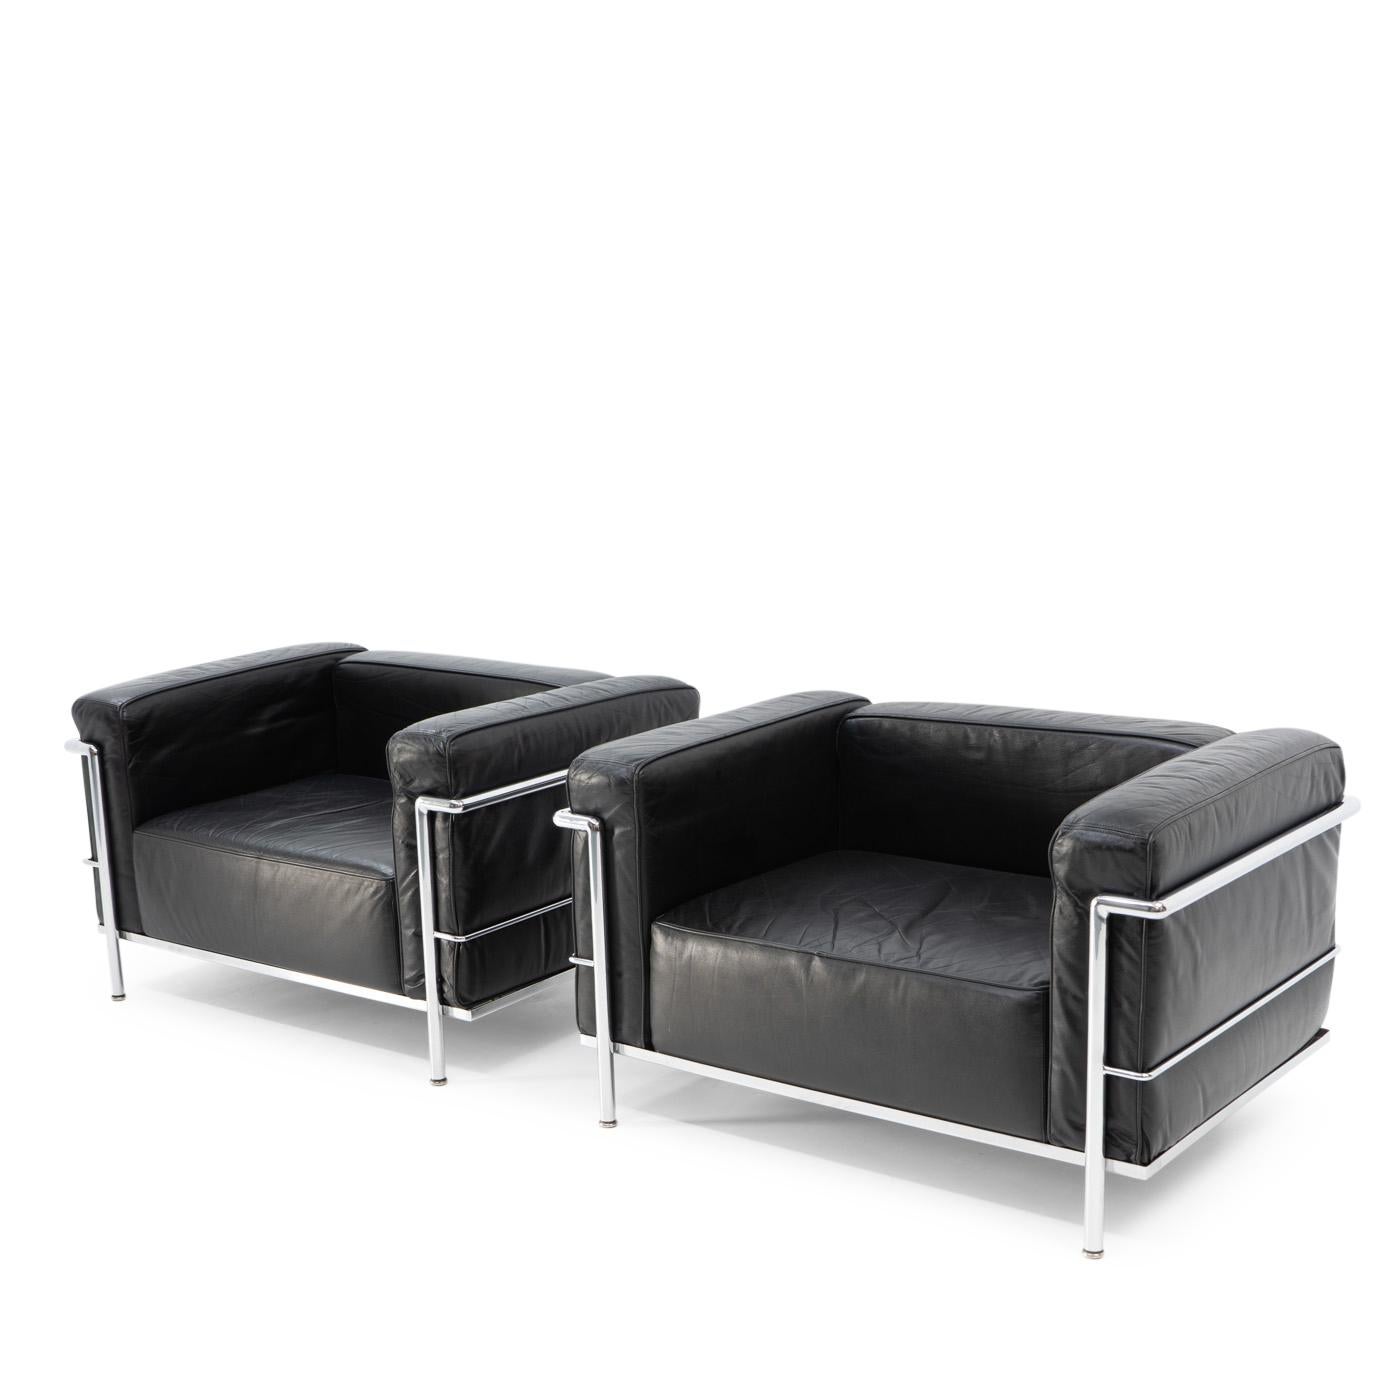 Early LC3 Lounge Chairs, Le Corbusier by Cassina, 1970s For Sale 7